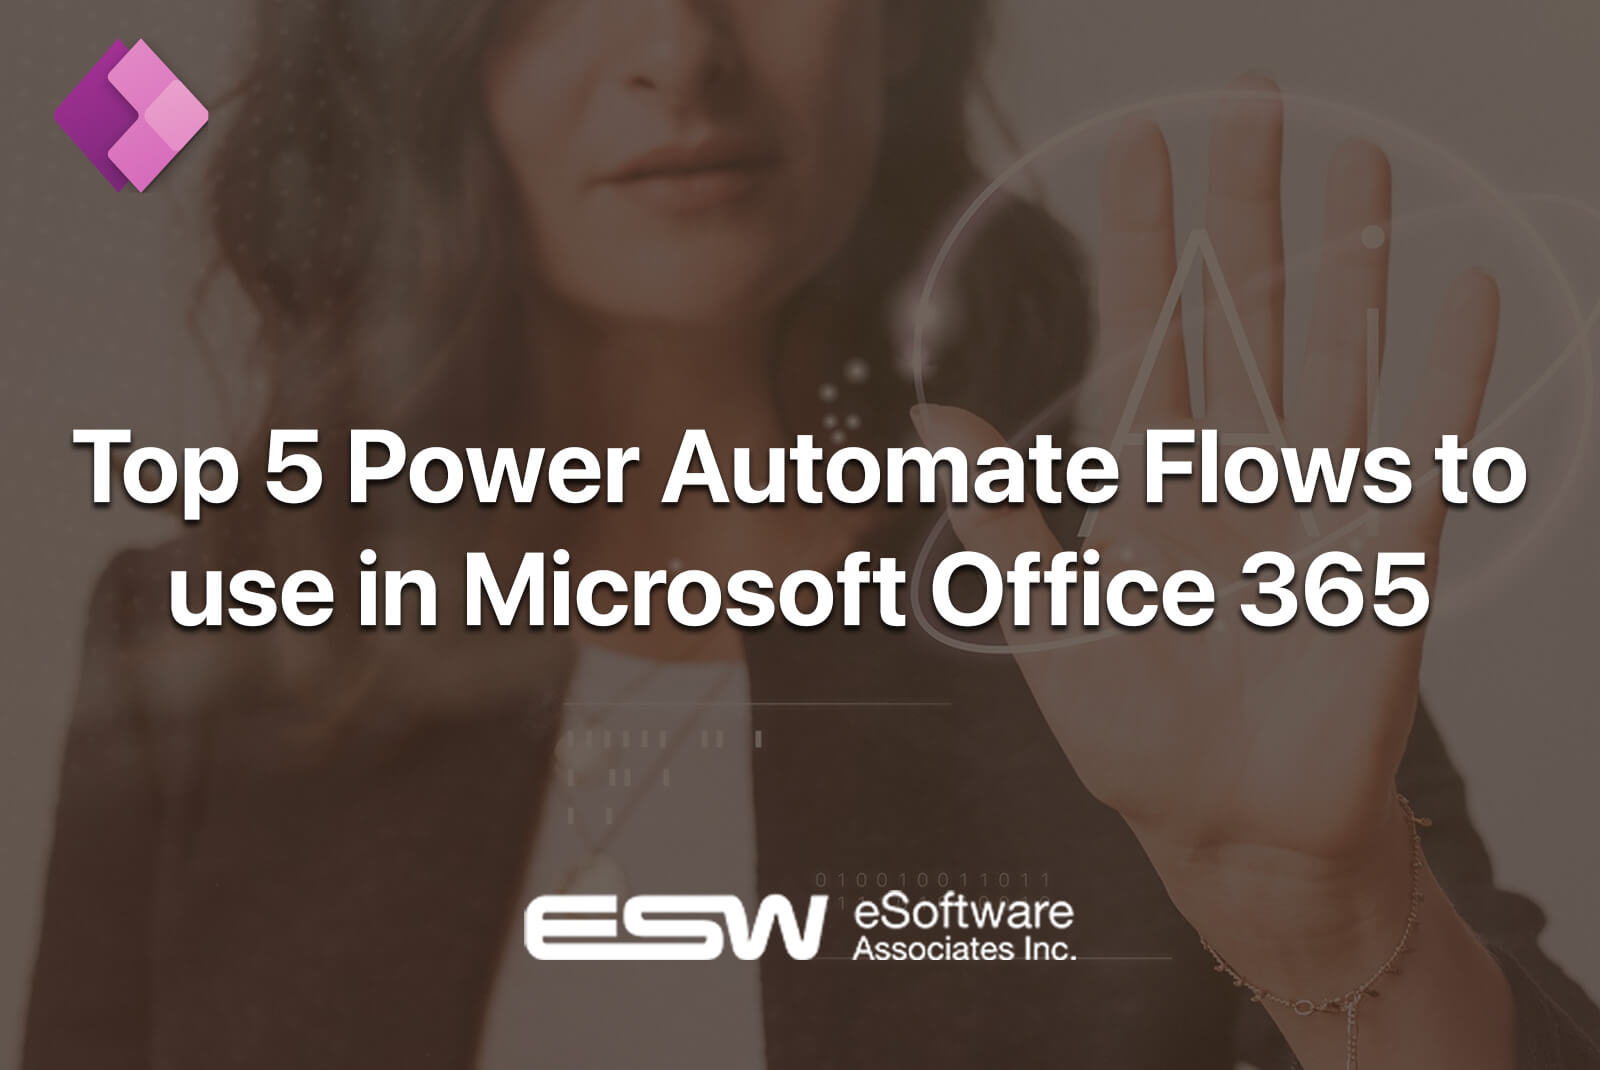 Top 5 Power Automate Flows to use in Microsoft Office 365